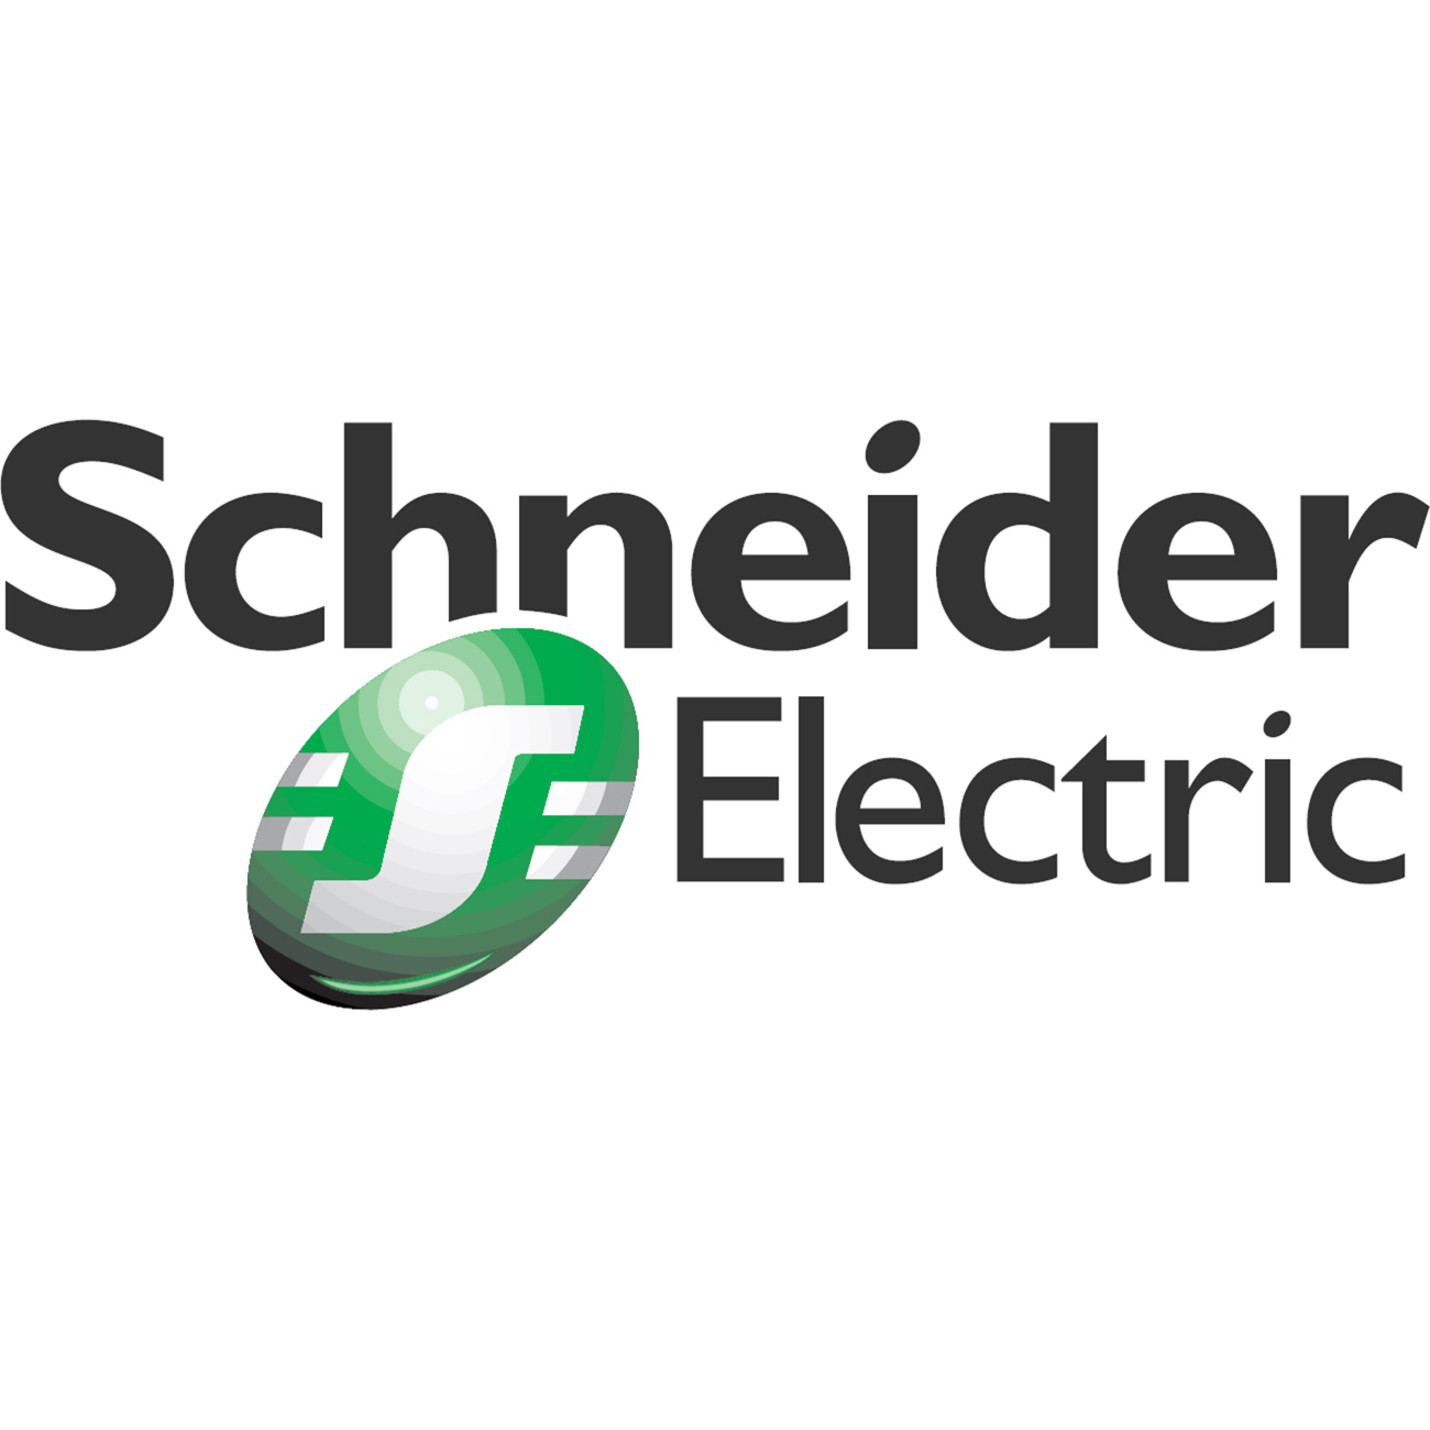 APC by Schneider Electric On-siteTechnology Training Course4 Hour Duration WNSC010401